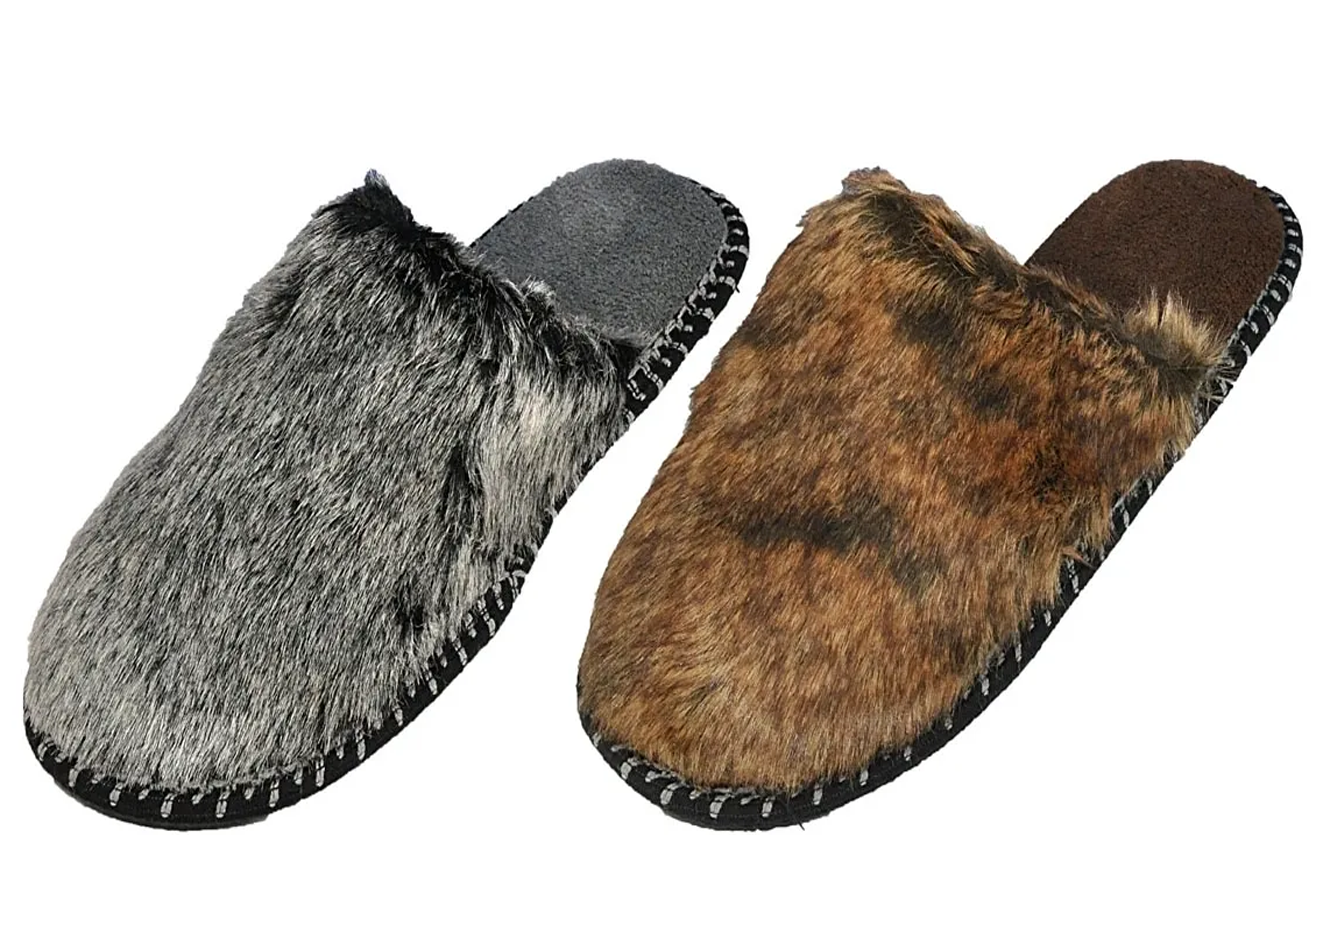 Wholesale Men's Slippers Gents Slooze Mix Assorted Colors Sizes Feet Warmer Bruce NSU14